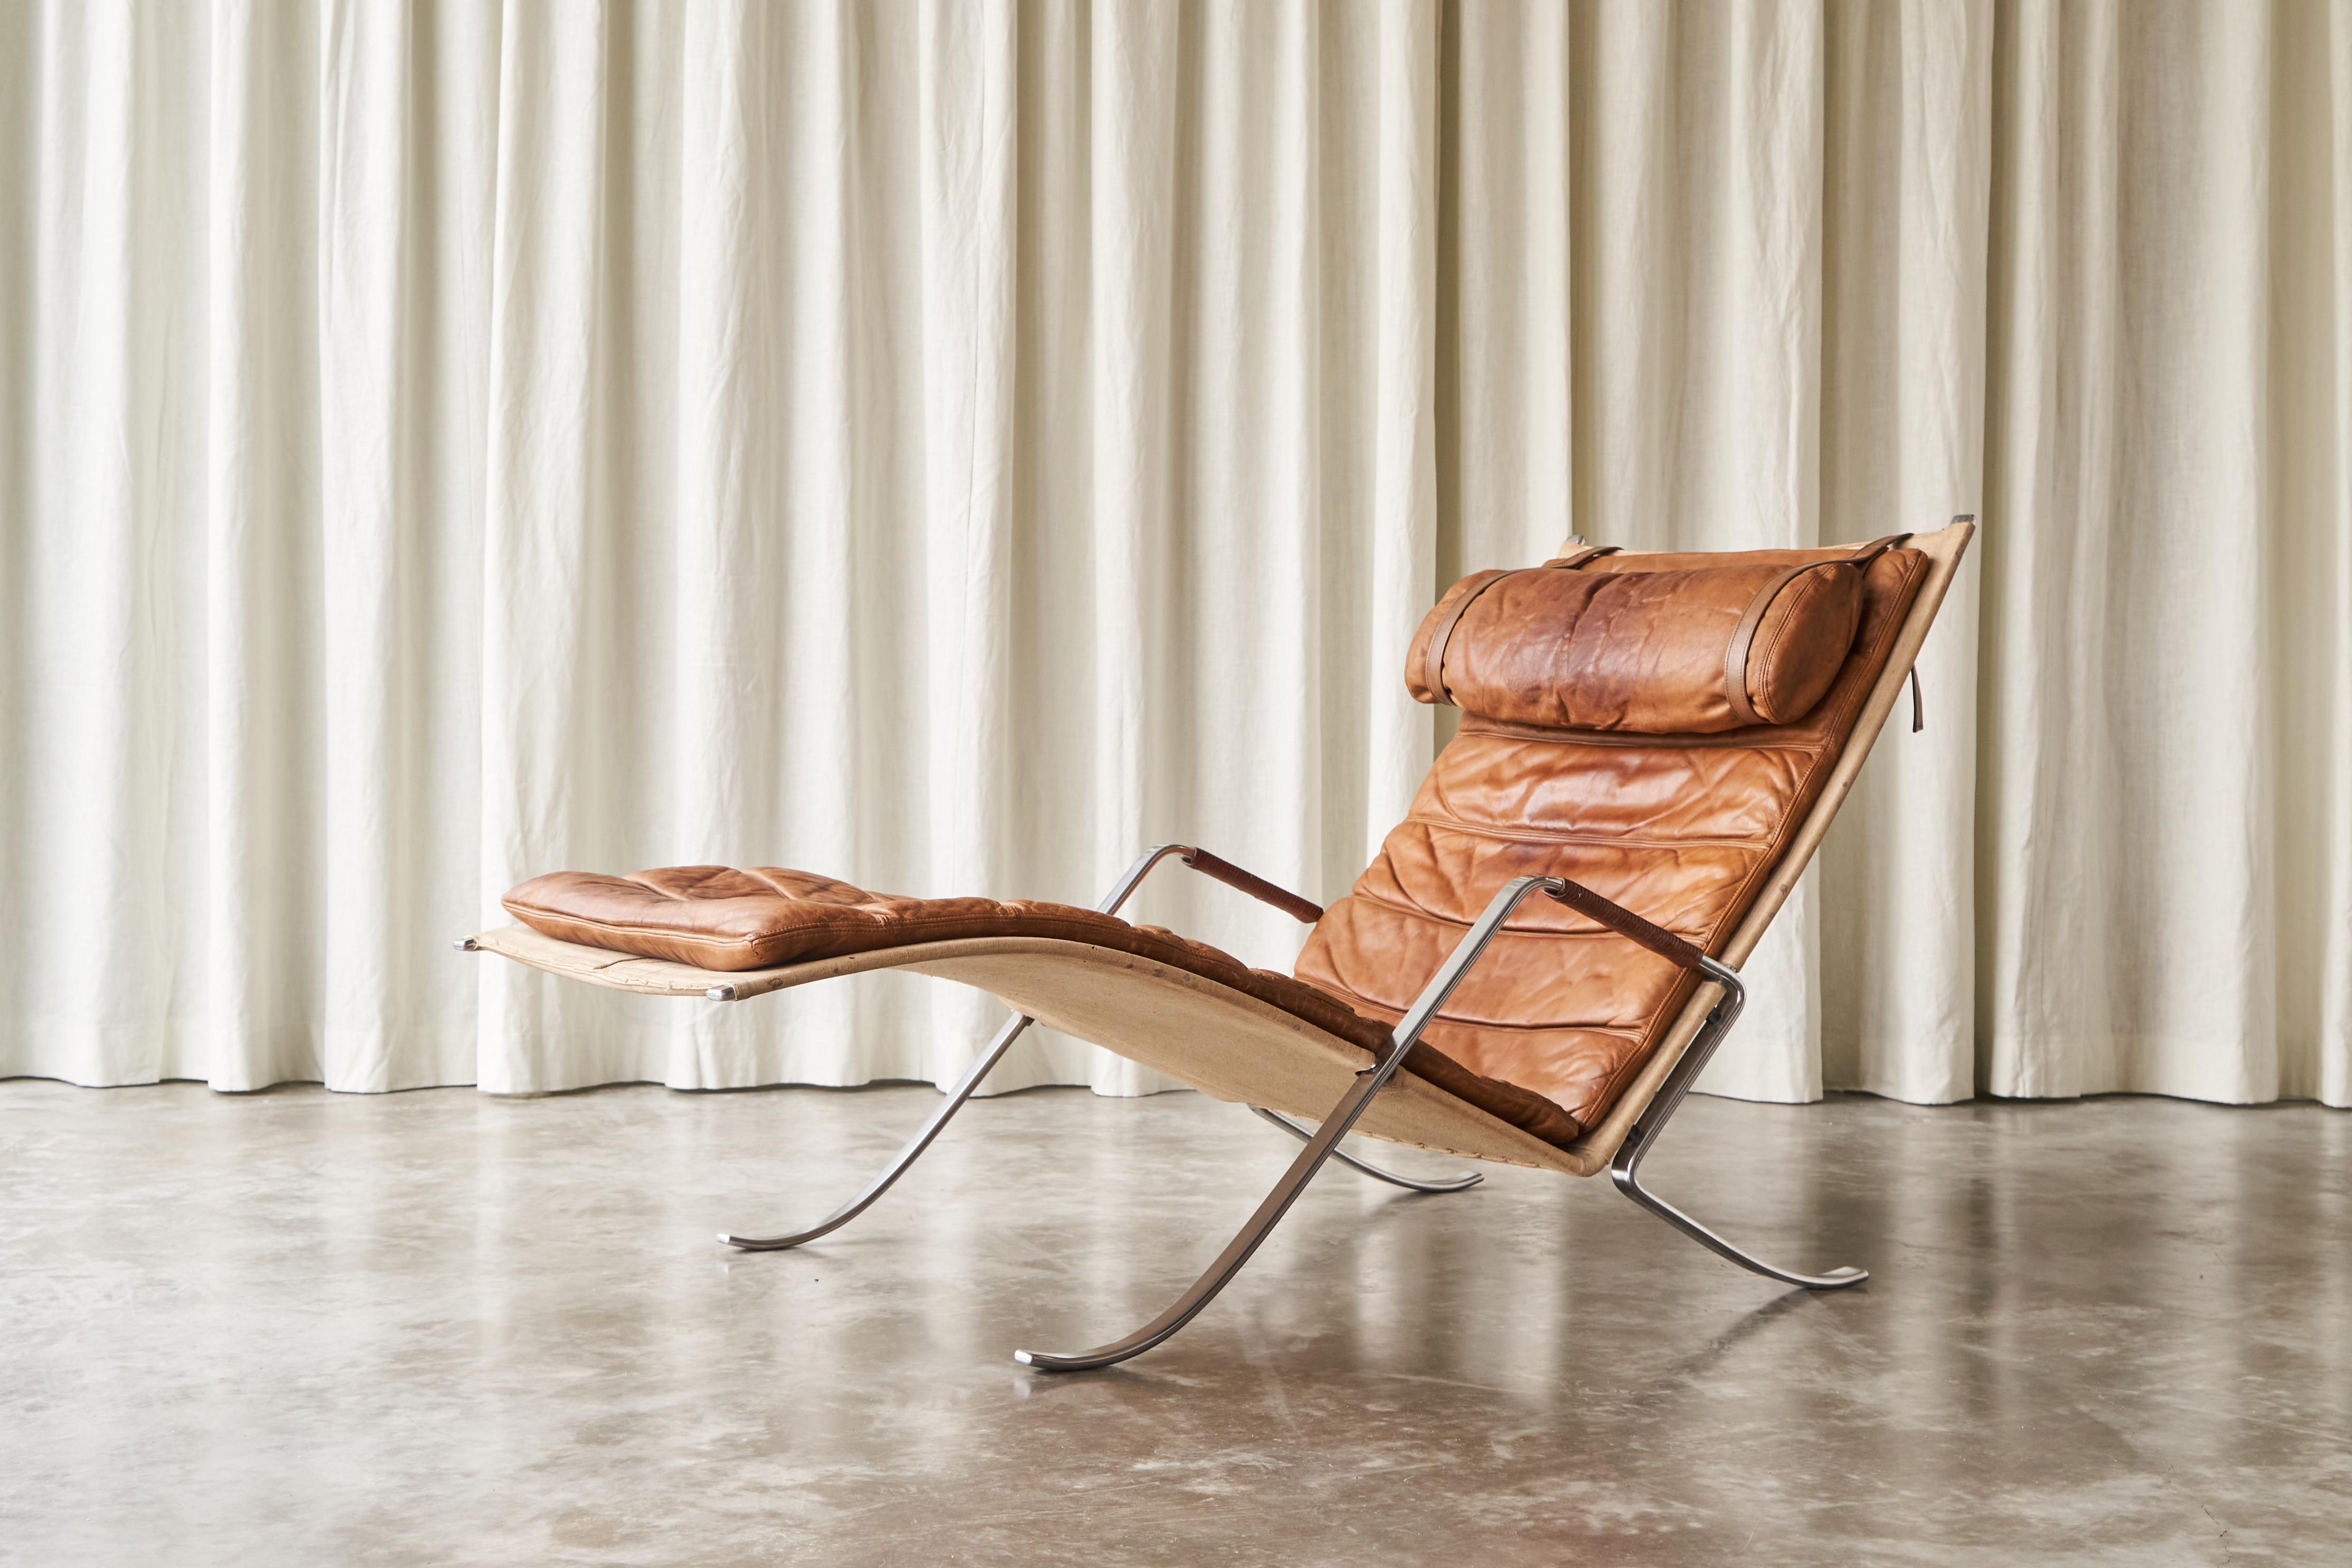 Fabricius & Kastholm FK87 in Patinated Cognac Leather, Alfred Kill production, 1960s.

This highly rare lounge chair model ‘FK87’ is one of the most remarkable designs by Preben Fabricius & Jørgen Kastholm, for Kill International, 1960s. It is an